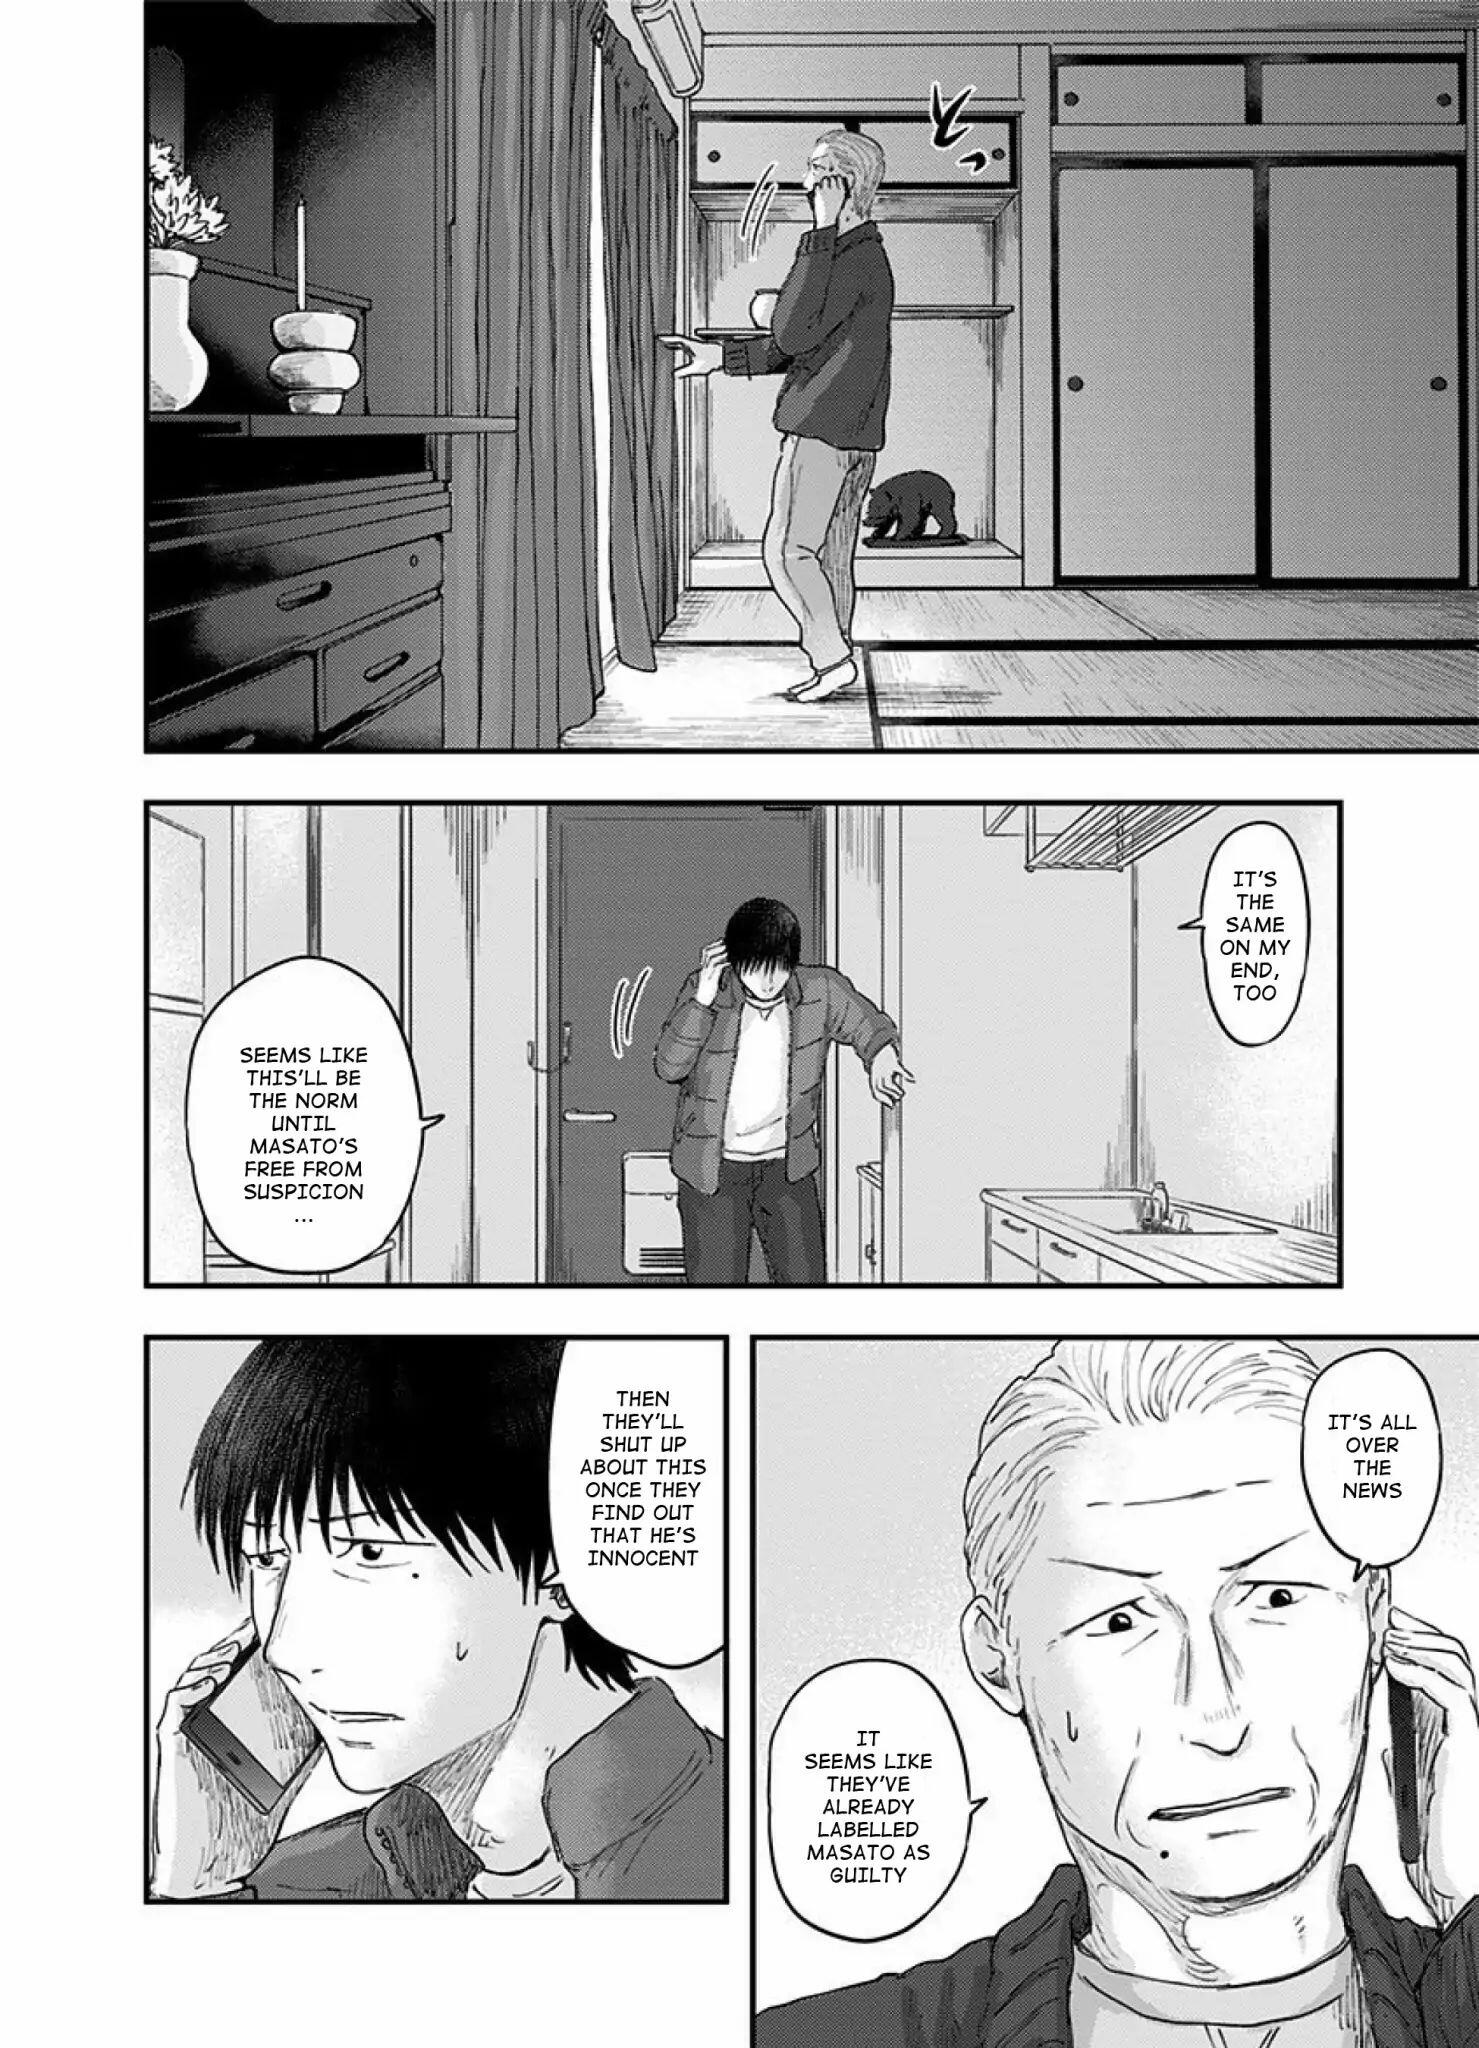 Route End Chapter 38 Read Route End Chapter 38 Online At Allmanga Us Page 4